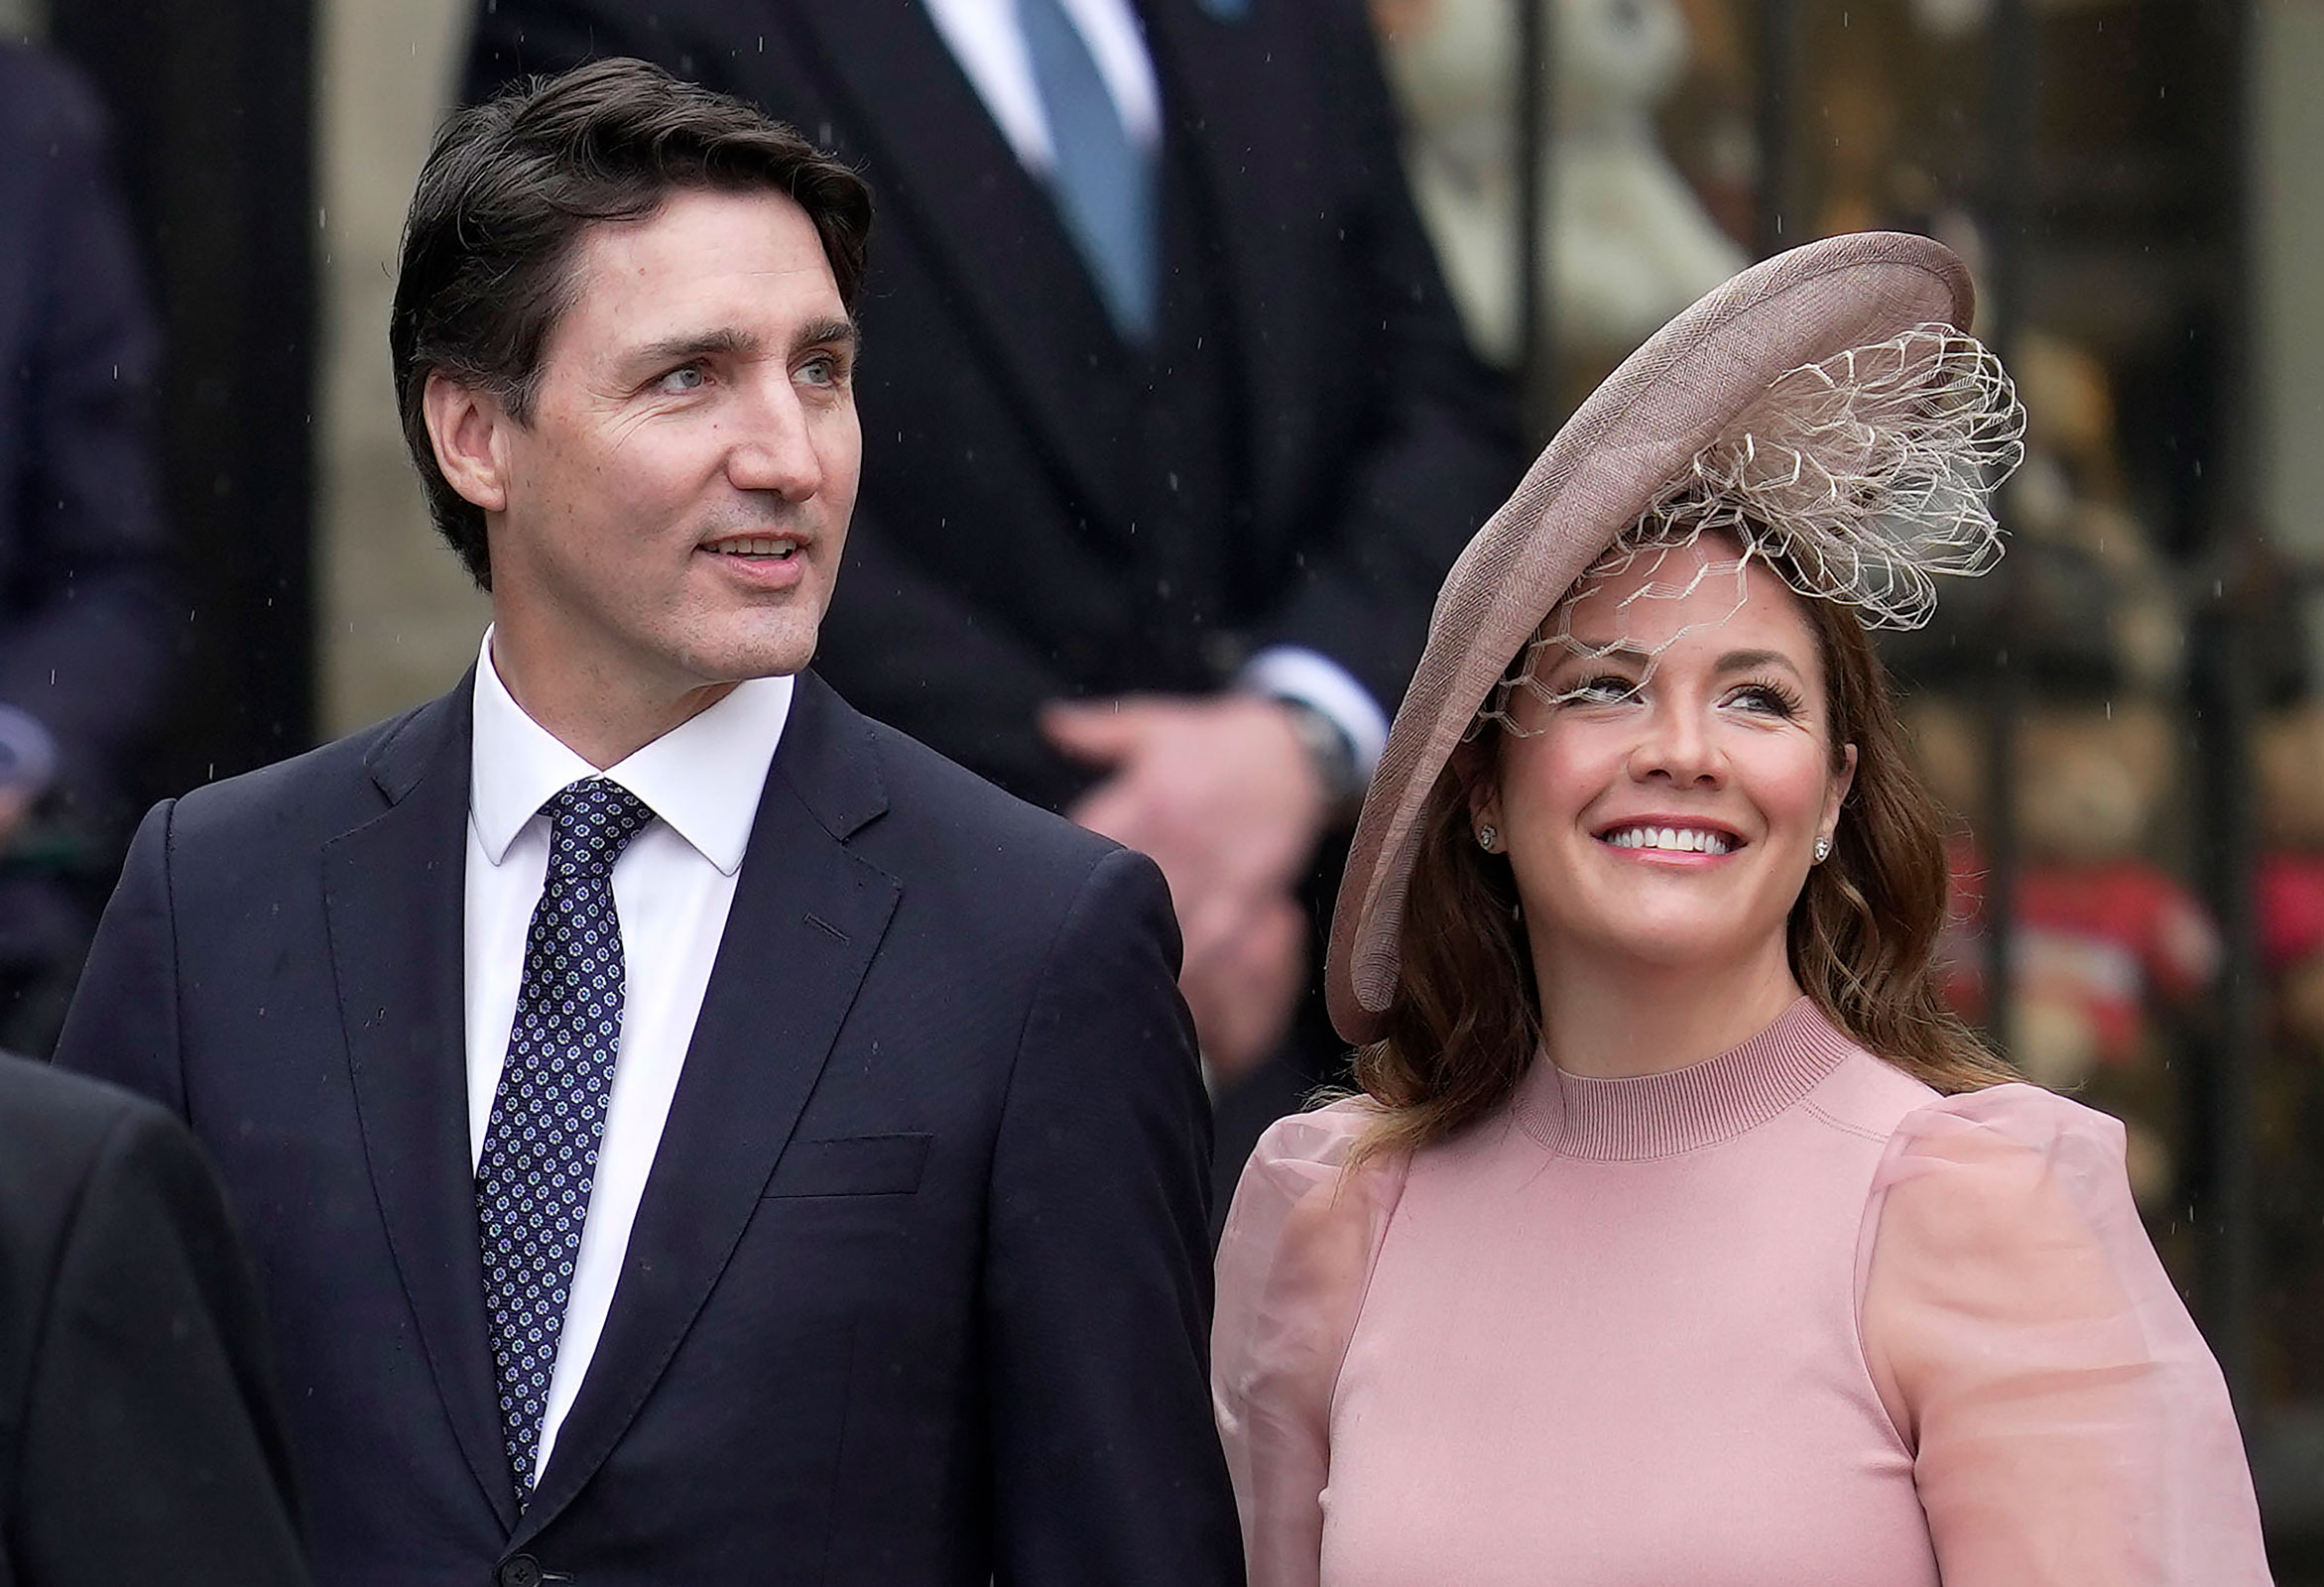 Canadian Prime Minister Justin Trudeau and Sophie Trudeau arrive at Westminster Abbey before King Charles' coronation.